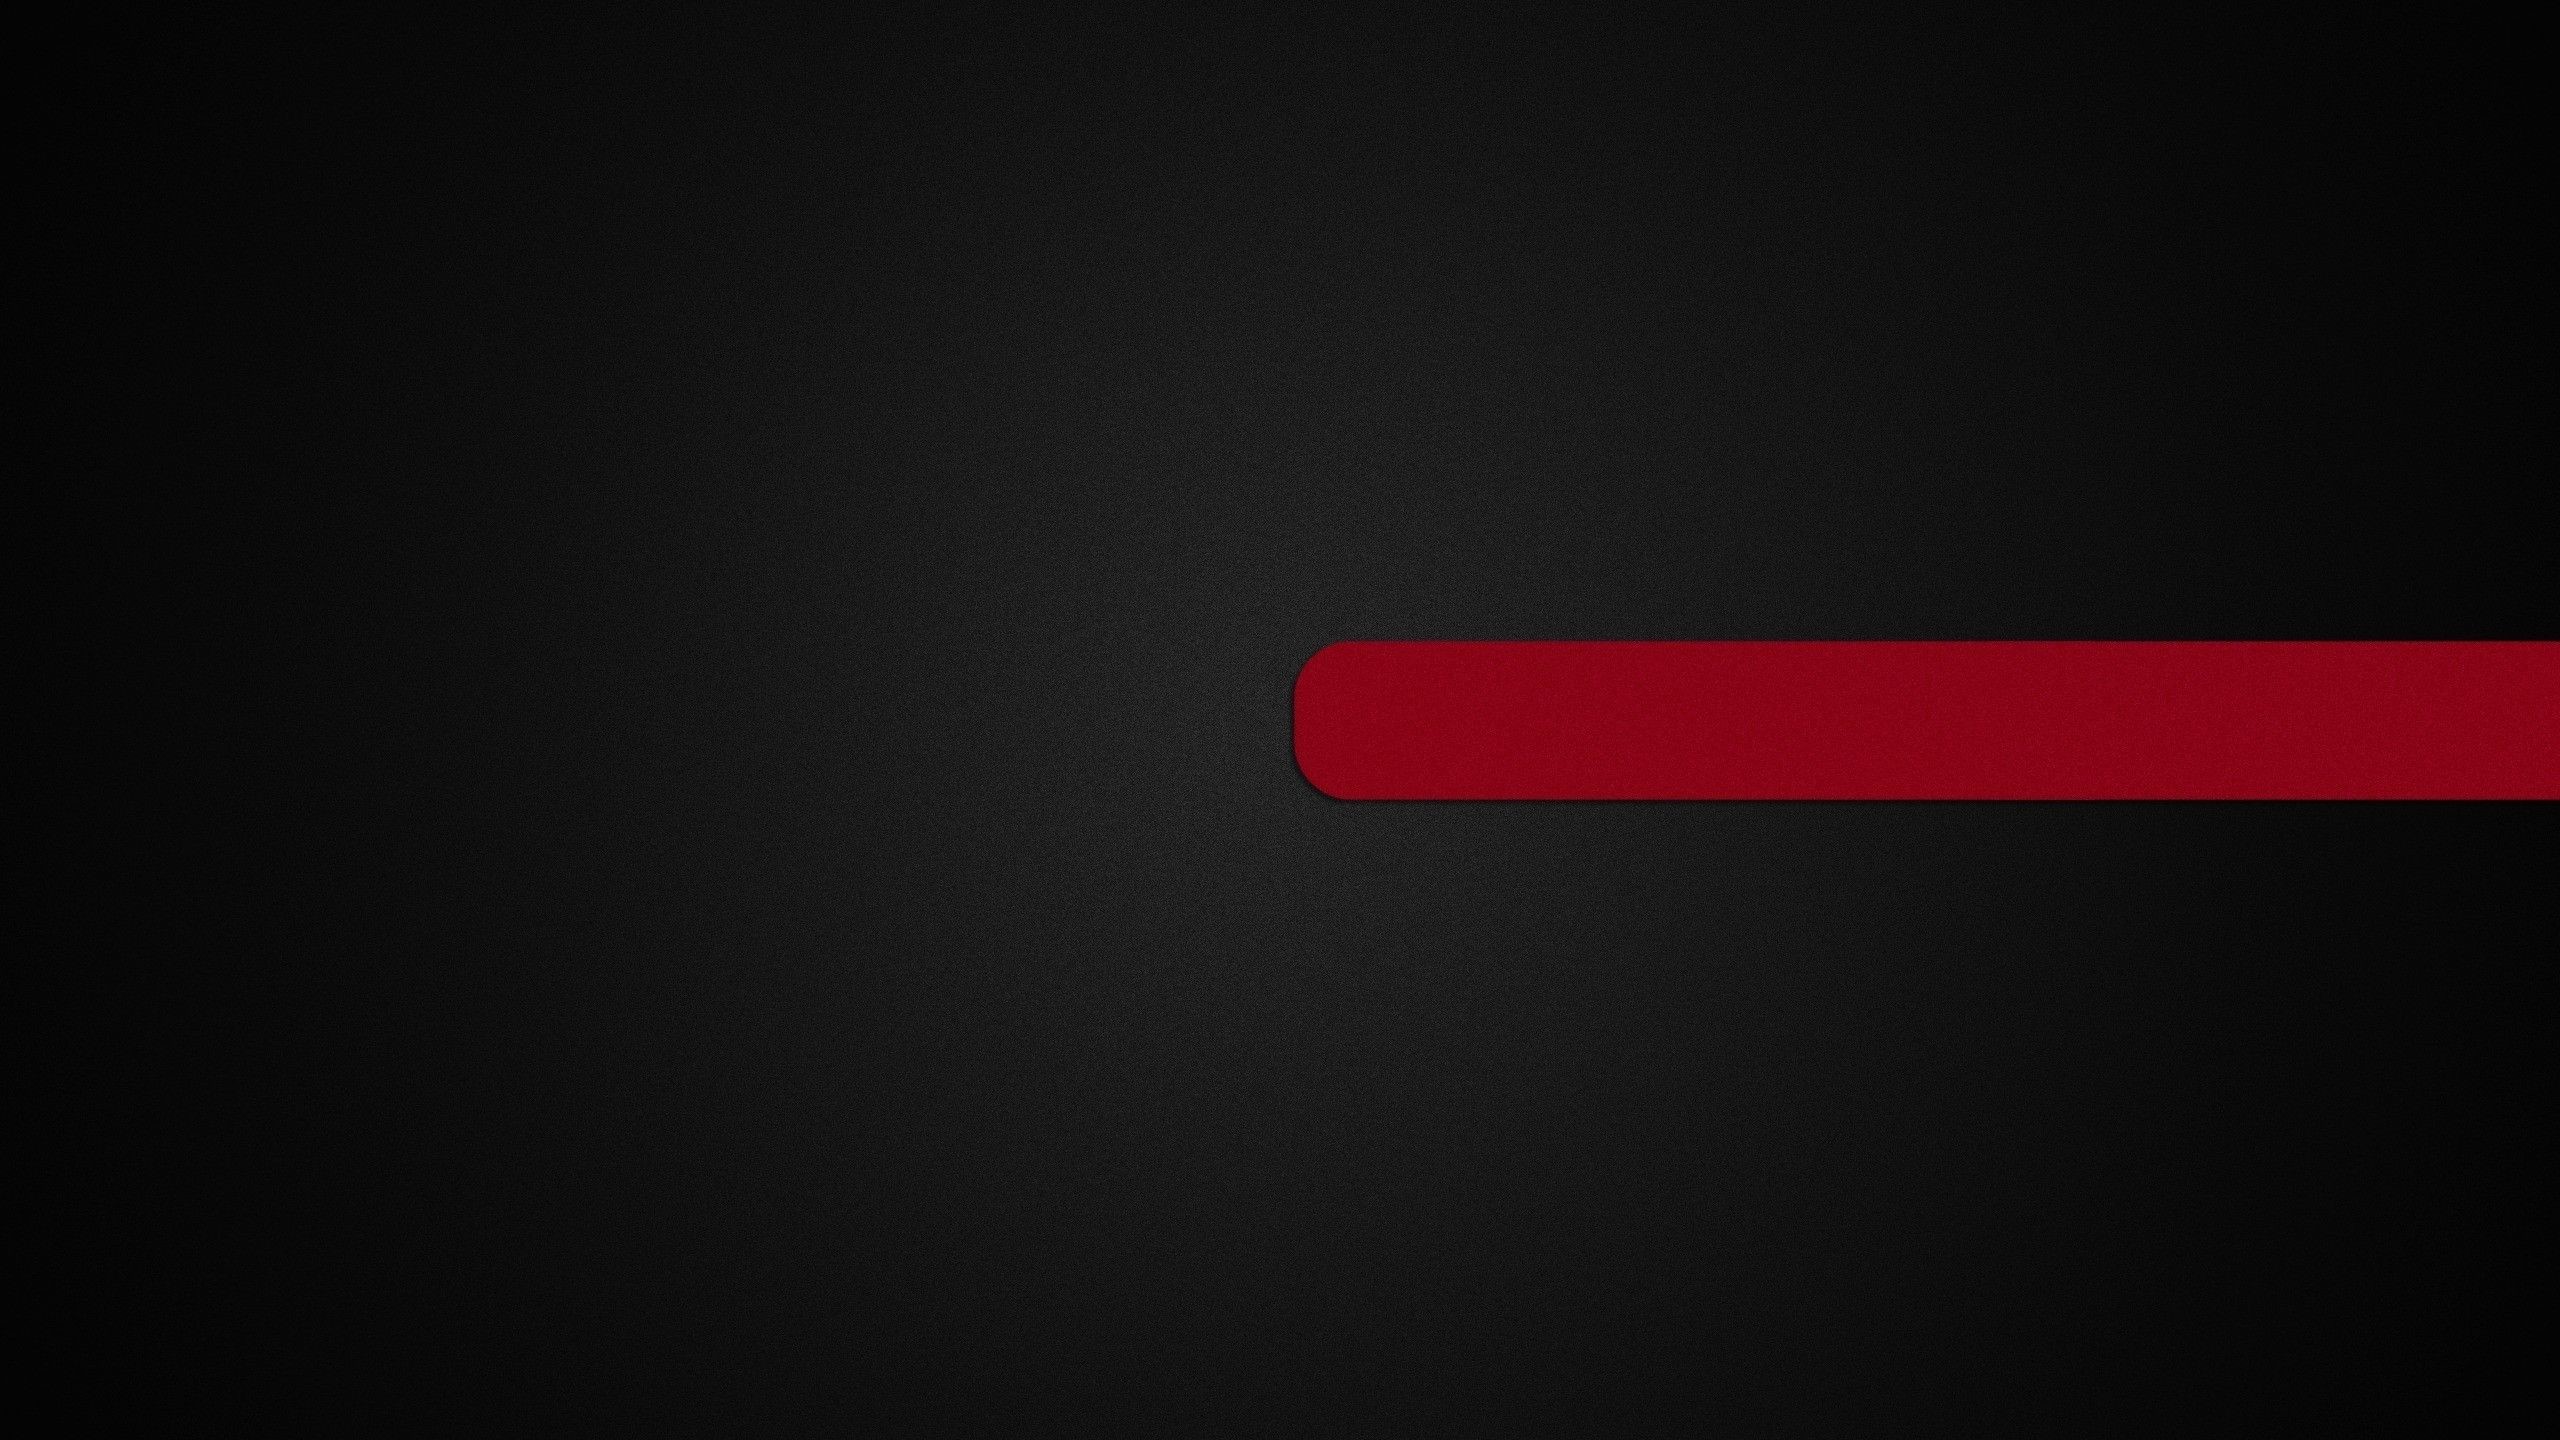 2560x1440 Black And Red Wallpapers HD - Wallpaper Cave